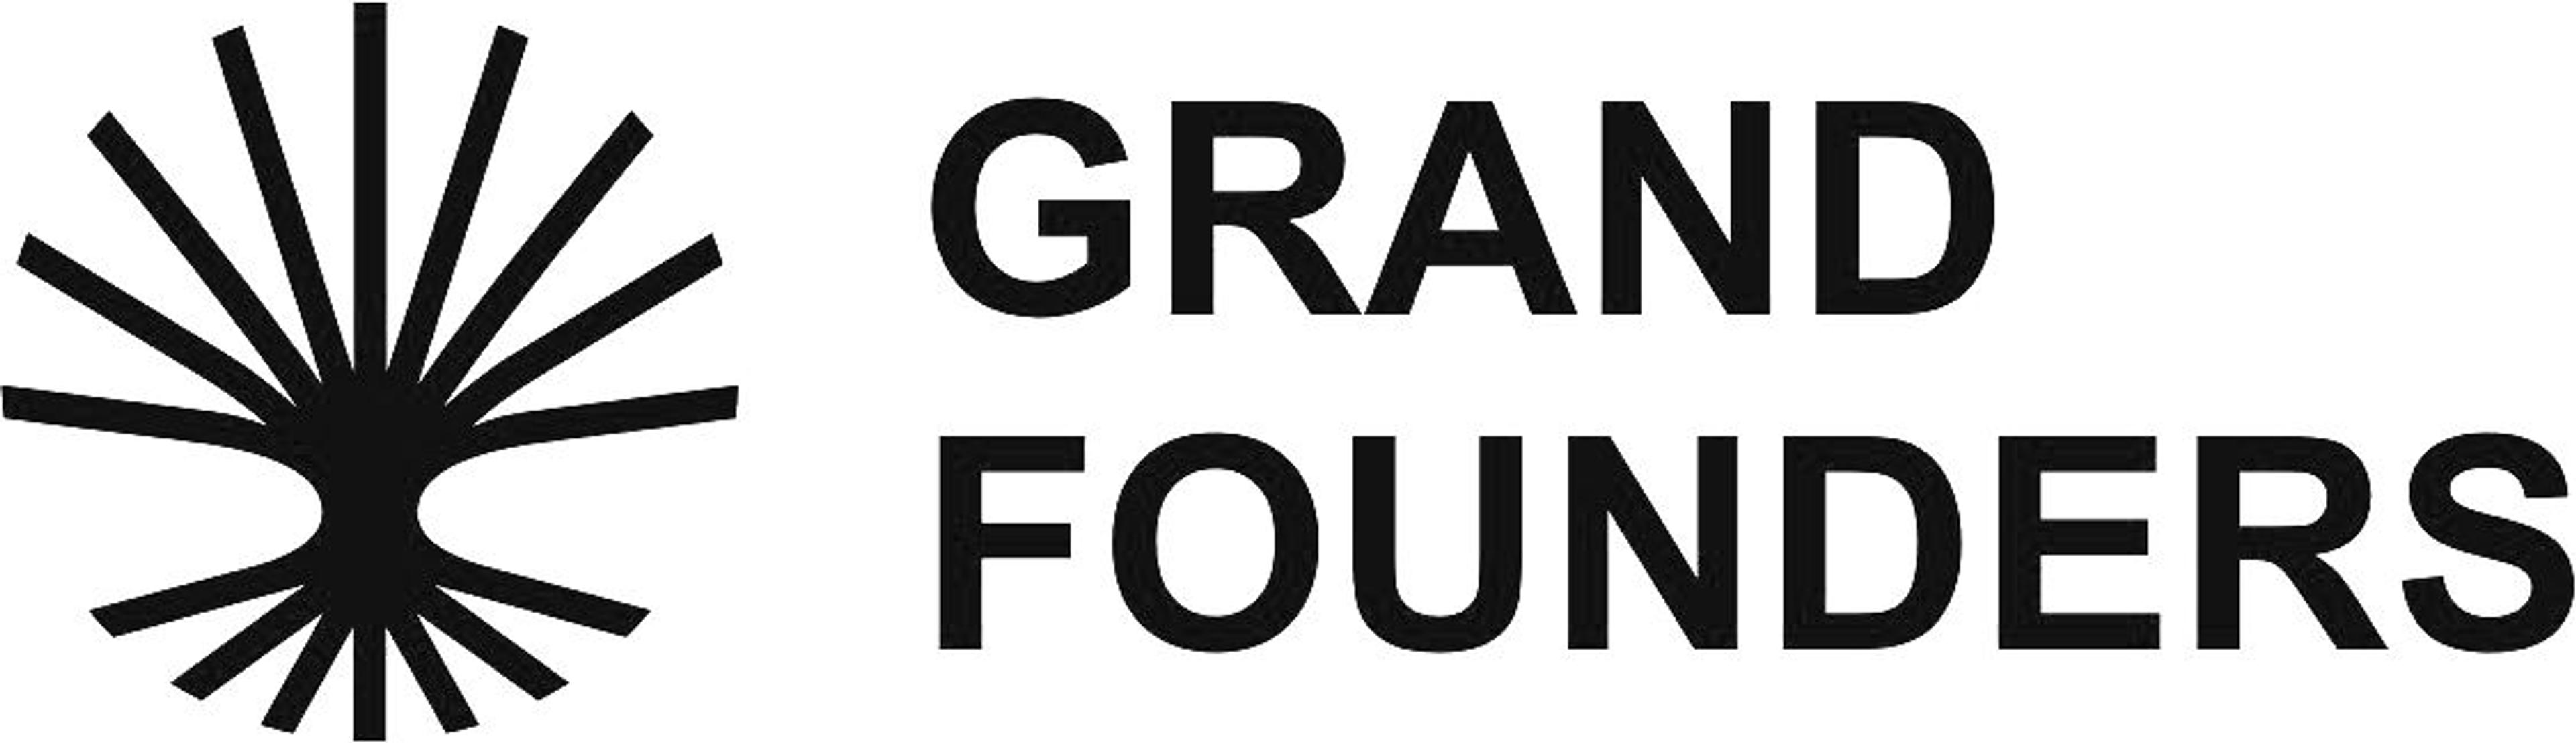 Grand Founders